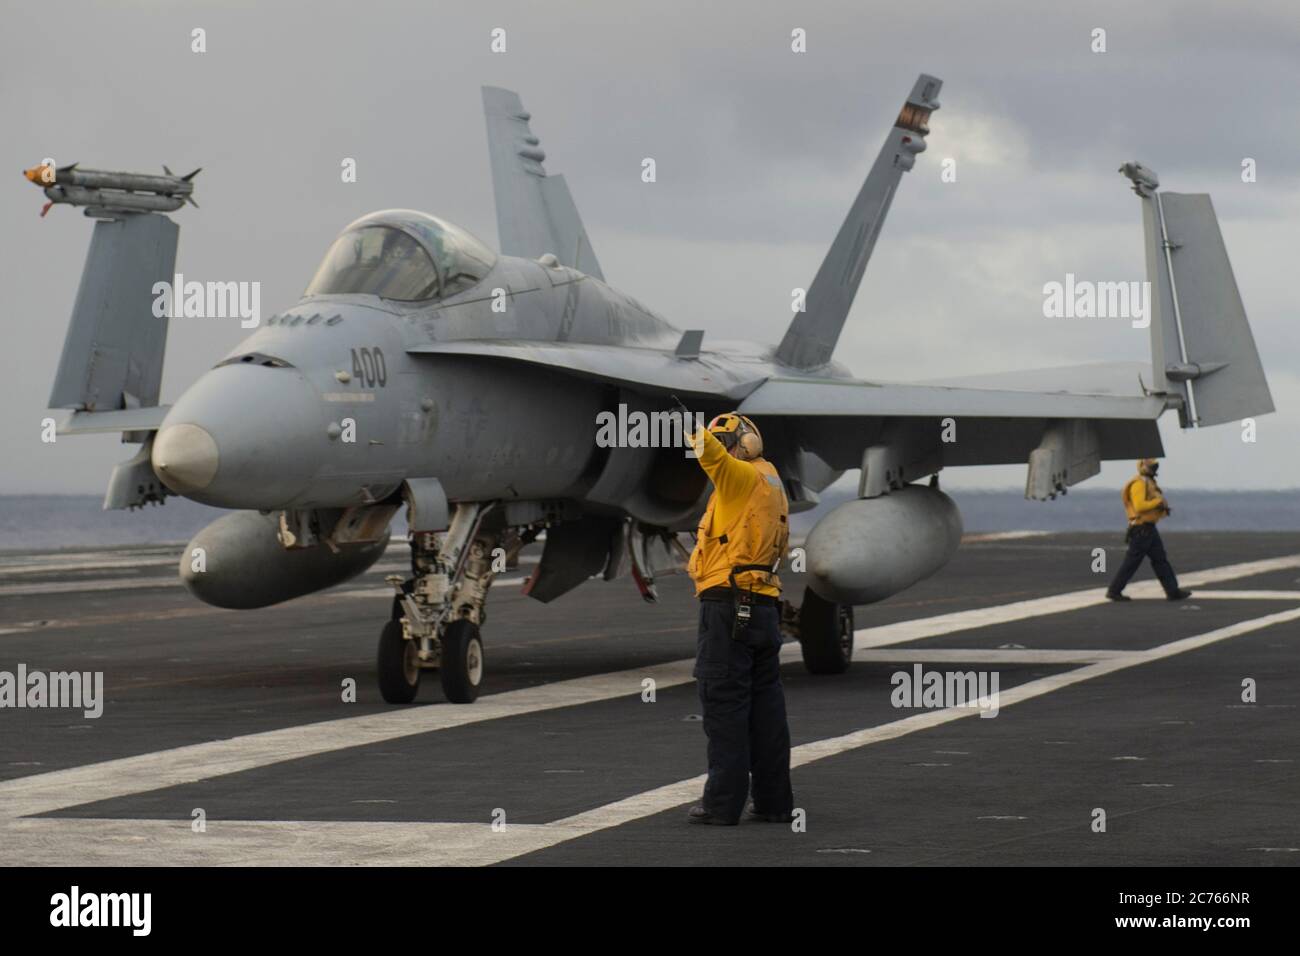 A U.S. Marine Corps F/A-18C Super Hornet assigned to the Death Rattlers of Marine Fighter Attack Squadron 323, is positioned on the flight deck of the Nimitz-class aircraft carrier USS Nimitz during dual-carrier operations with the USS Ronald Reagan June 28, 2020 in the Philippine Sea. Stock Photo